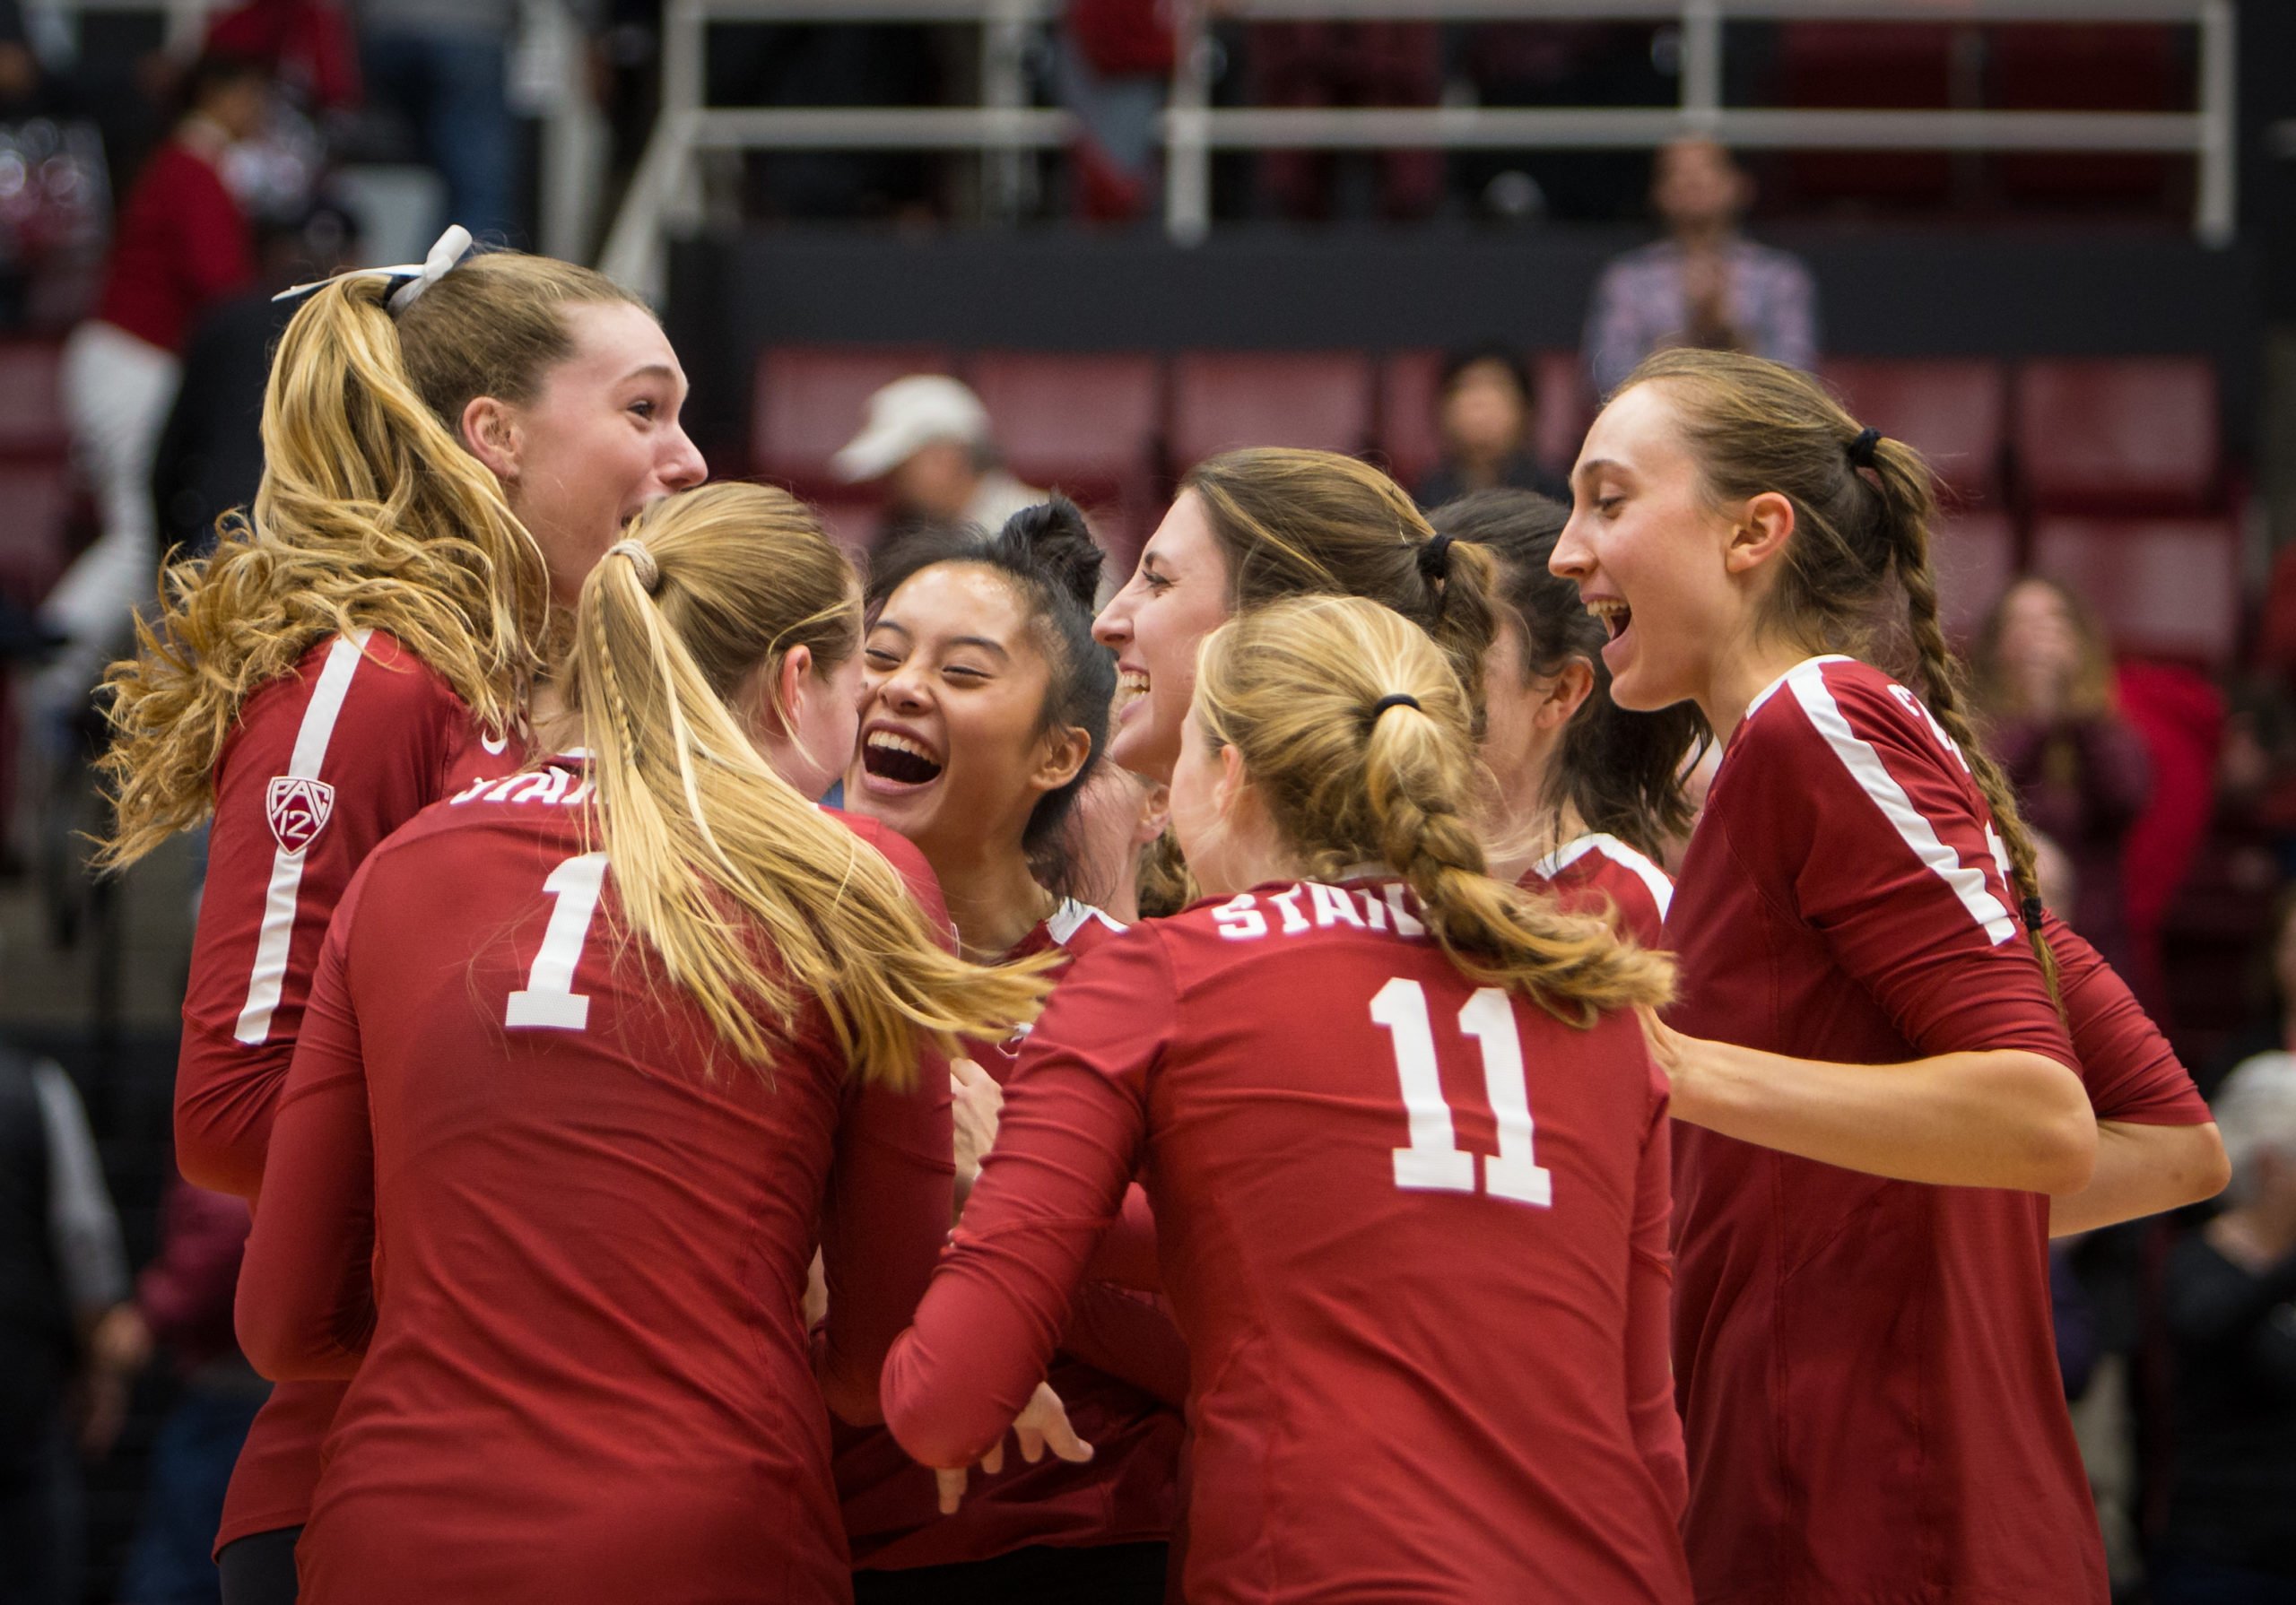 The Stanford Women's Volleyball team celebrates a point.